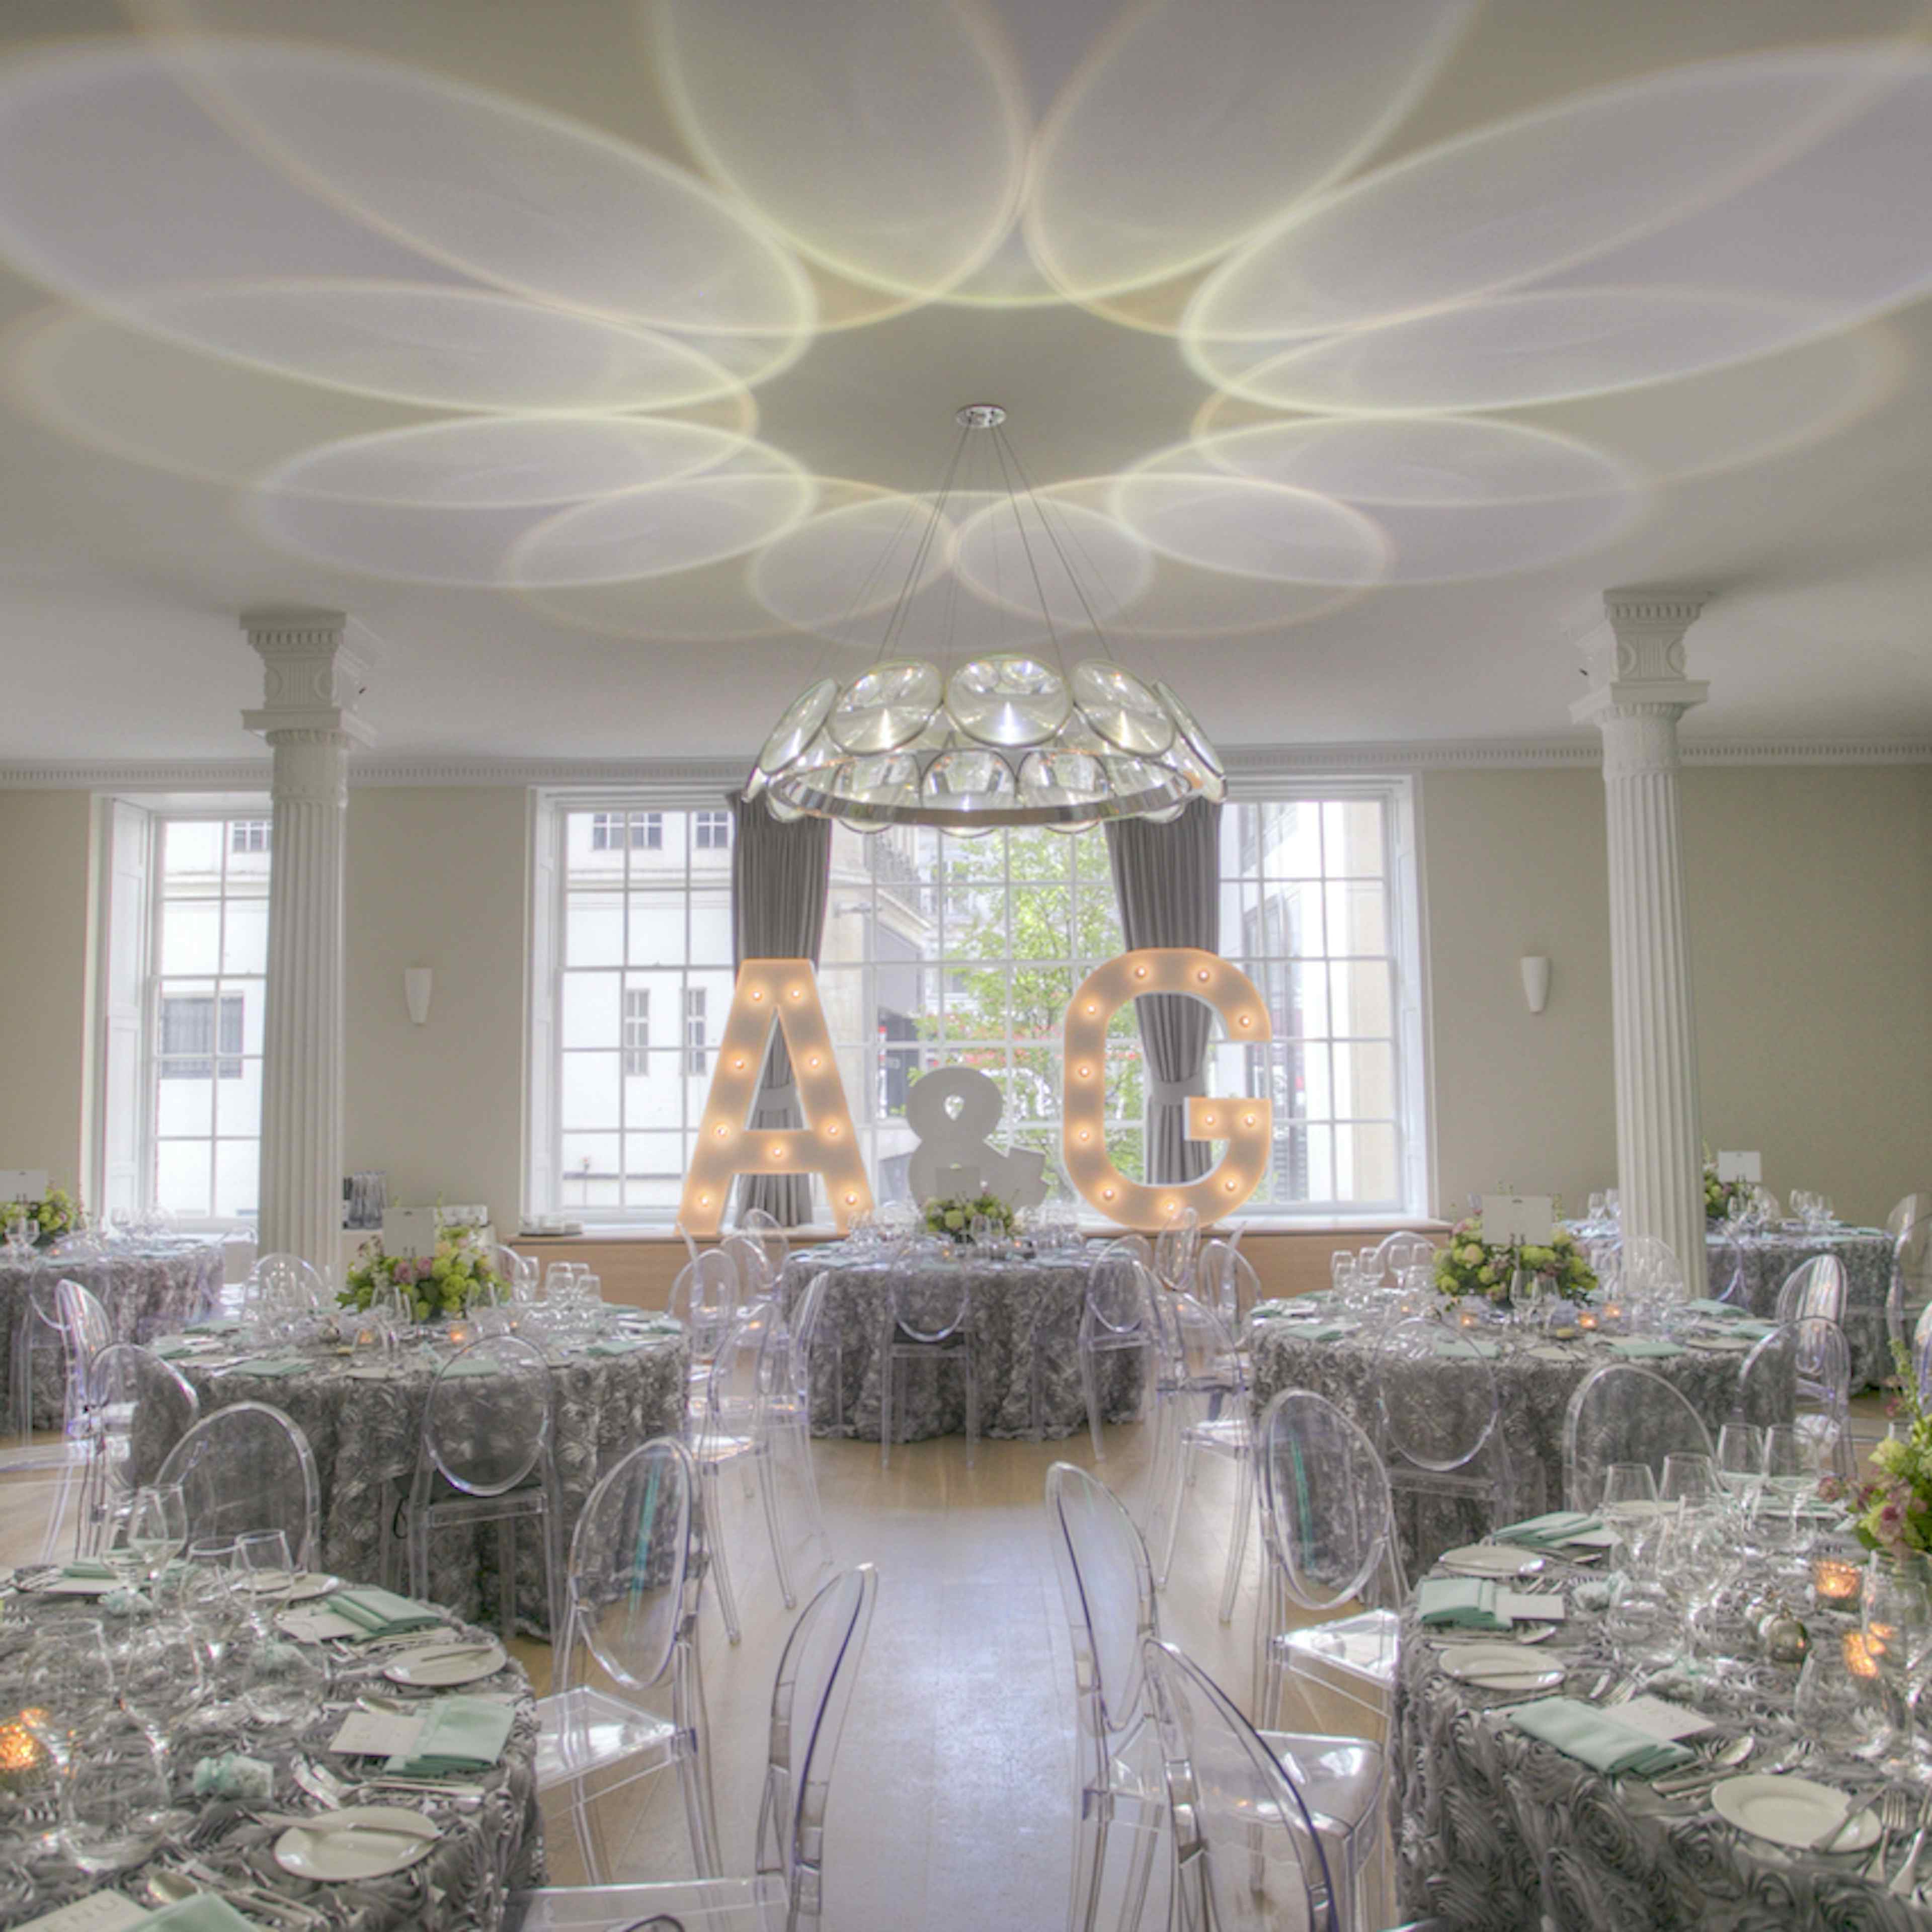 RSA House - Exclusive Hire for Weddings at RSA House image 3